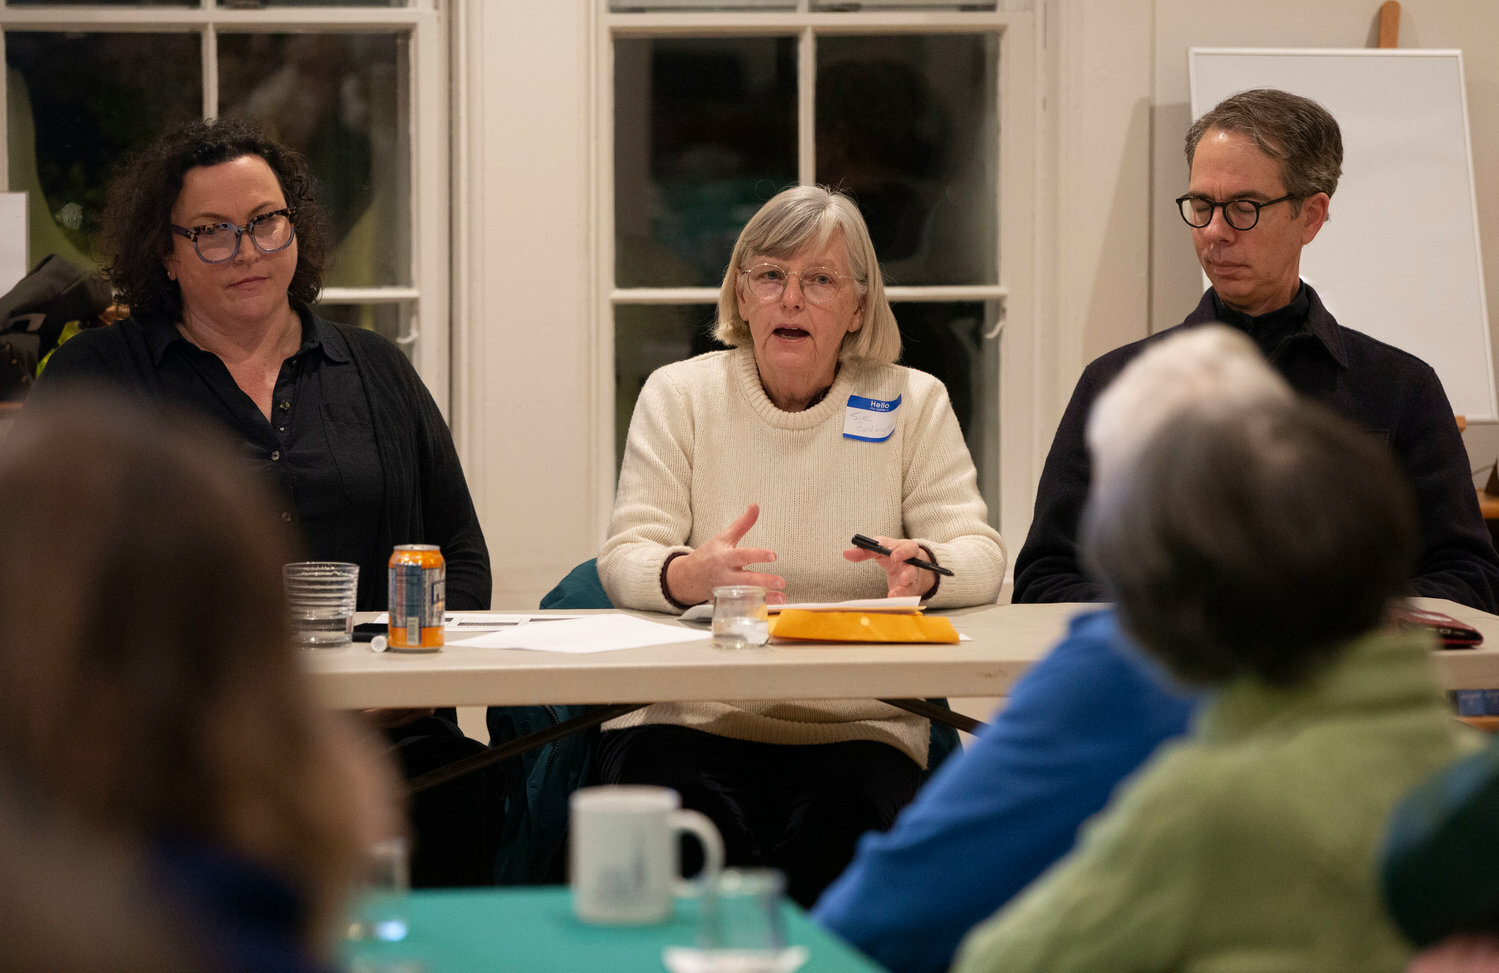 Susan Bodington, of the Little Compton Housing Trust, addresses the crowd at the United Congregational Church of Little Compton at a meeting called this past February to discuss the state of affordable housing in Little Compton.